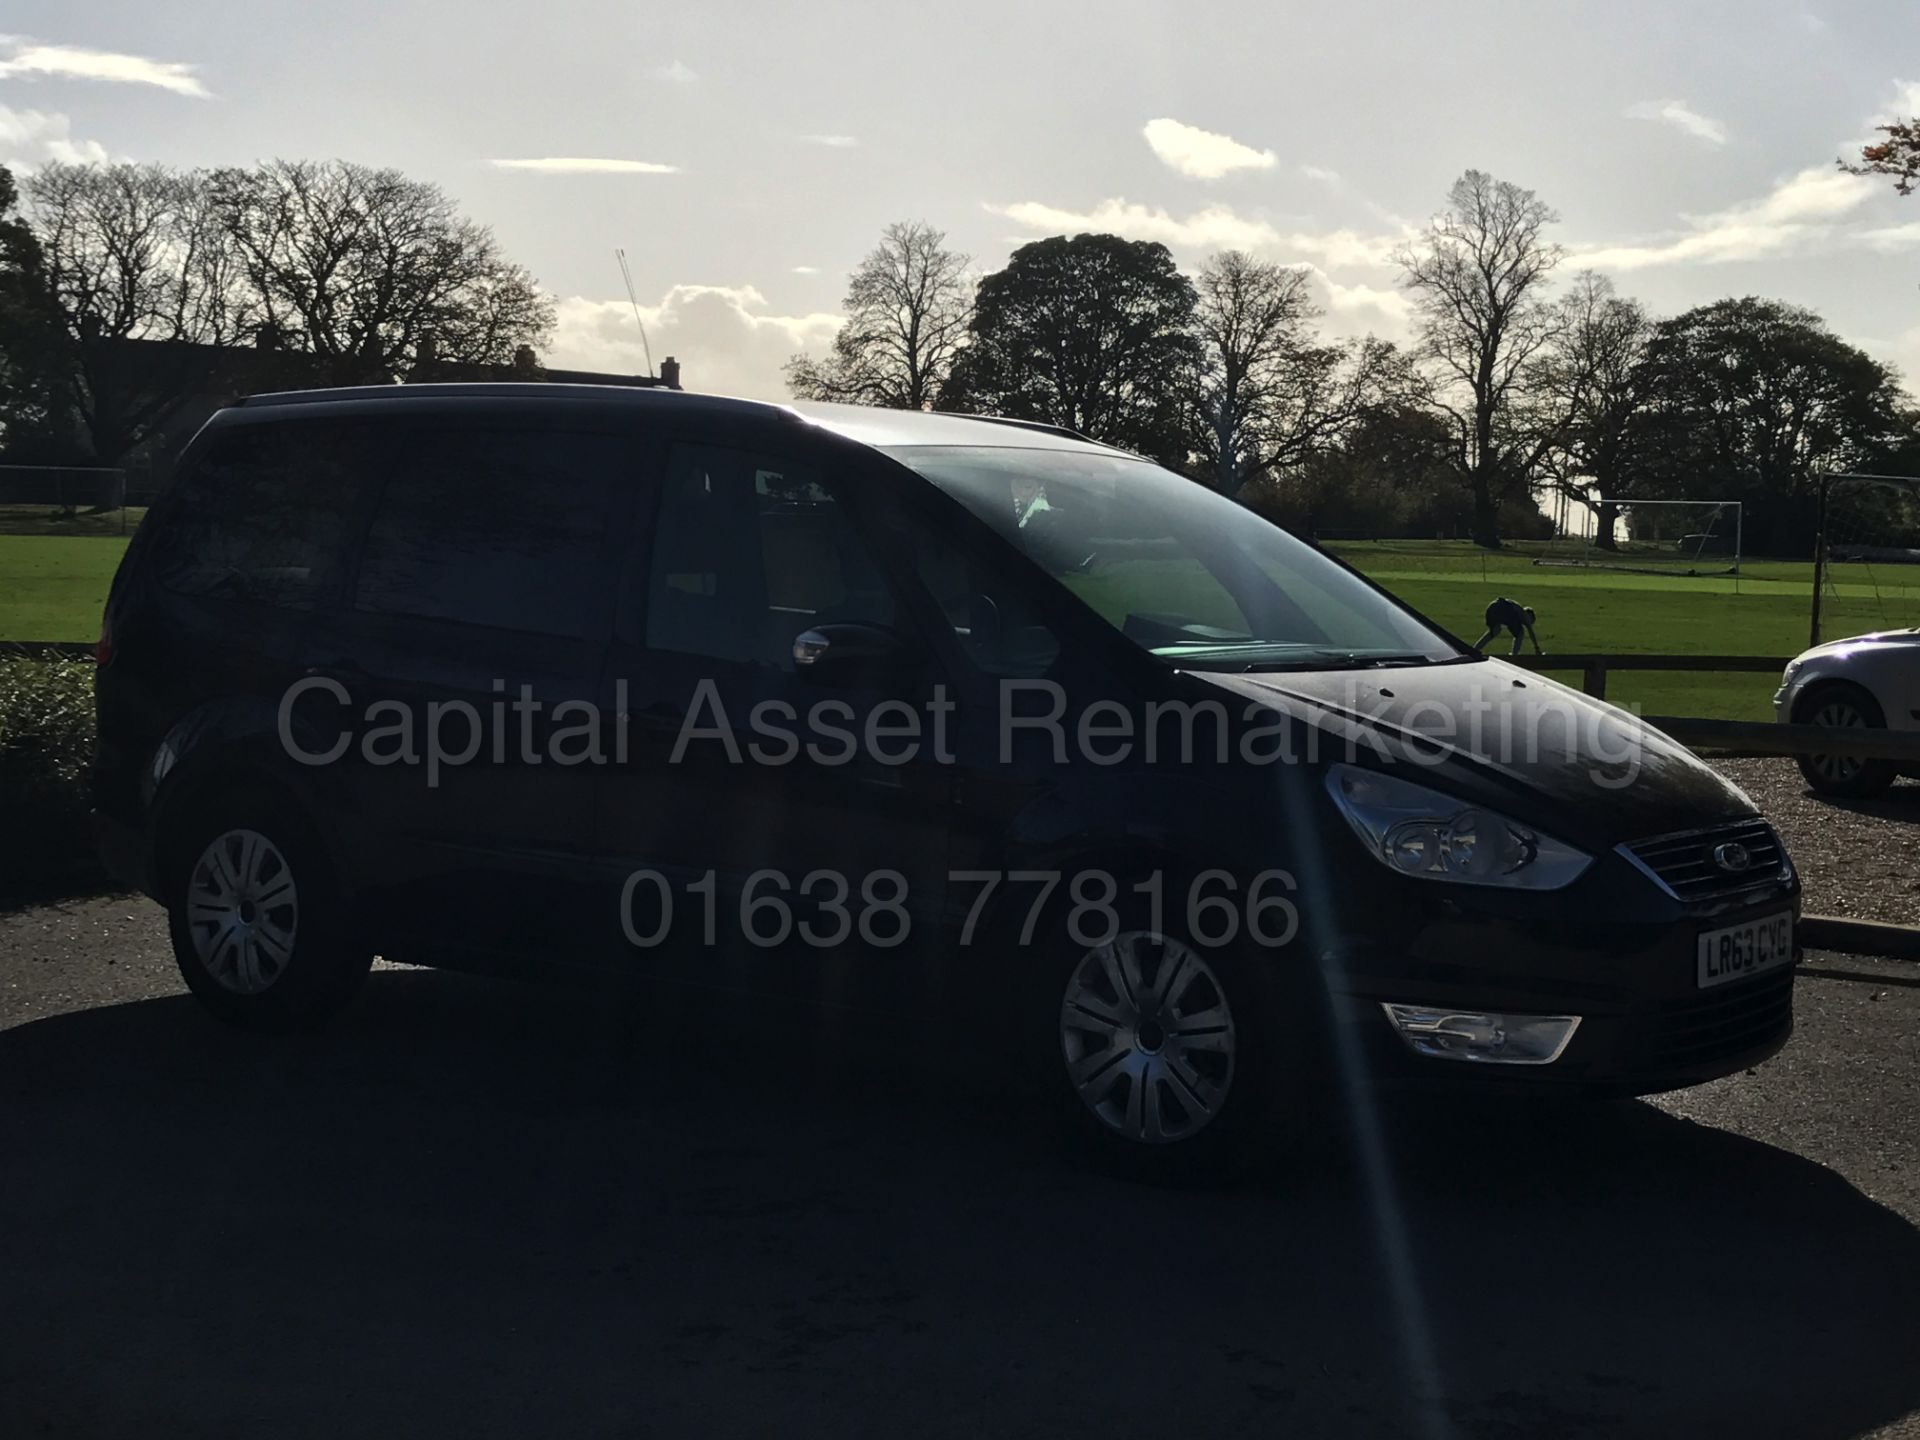 (ON SALE) FORD GALAXY 'ZETEC' 7 SEATER MPV (2014 MODEL) '2.0 TDCI -140 BHP' (1 OWNER) *FULL HISTORY* - Image 8 of 28